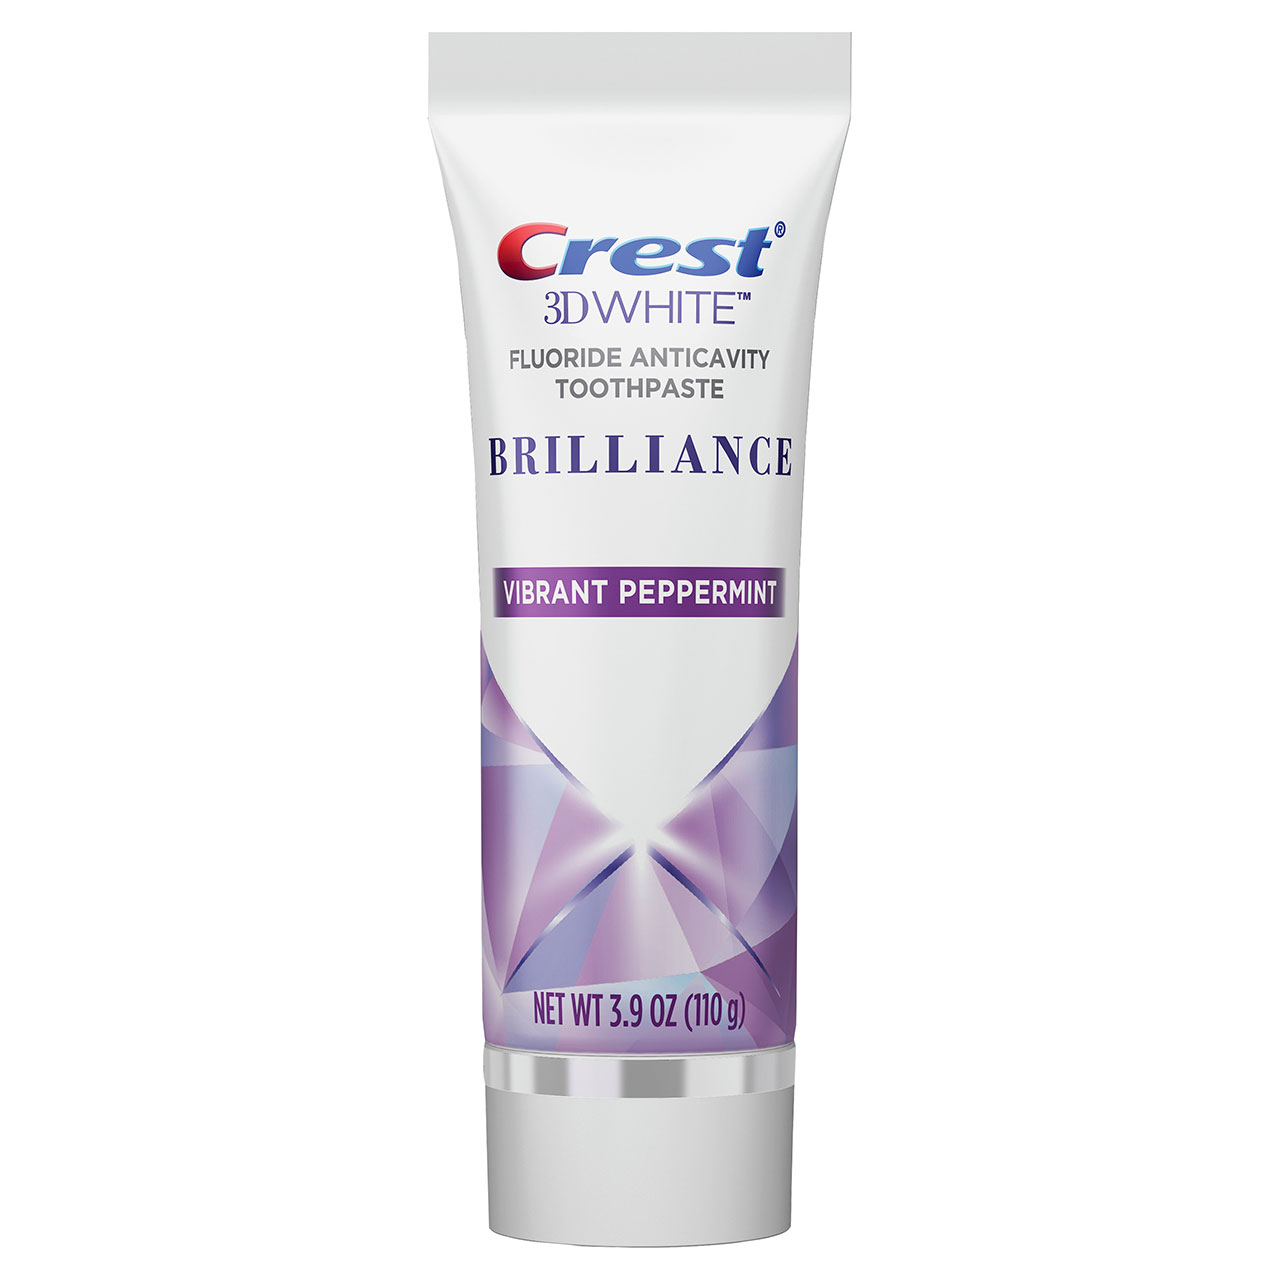 Crest 3D White Brilliance Teeth Whitening Toothpaste, Vibrant Peppermint